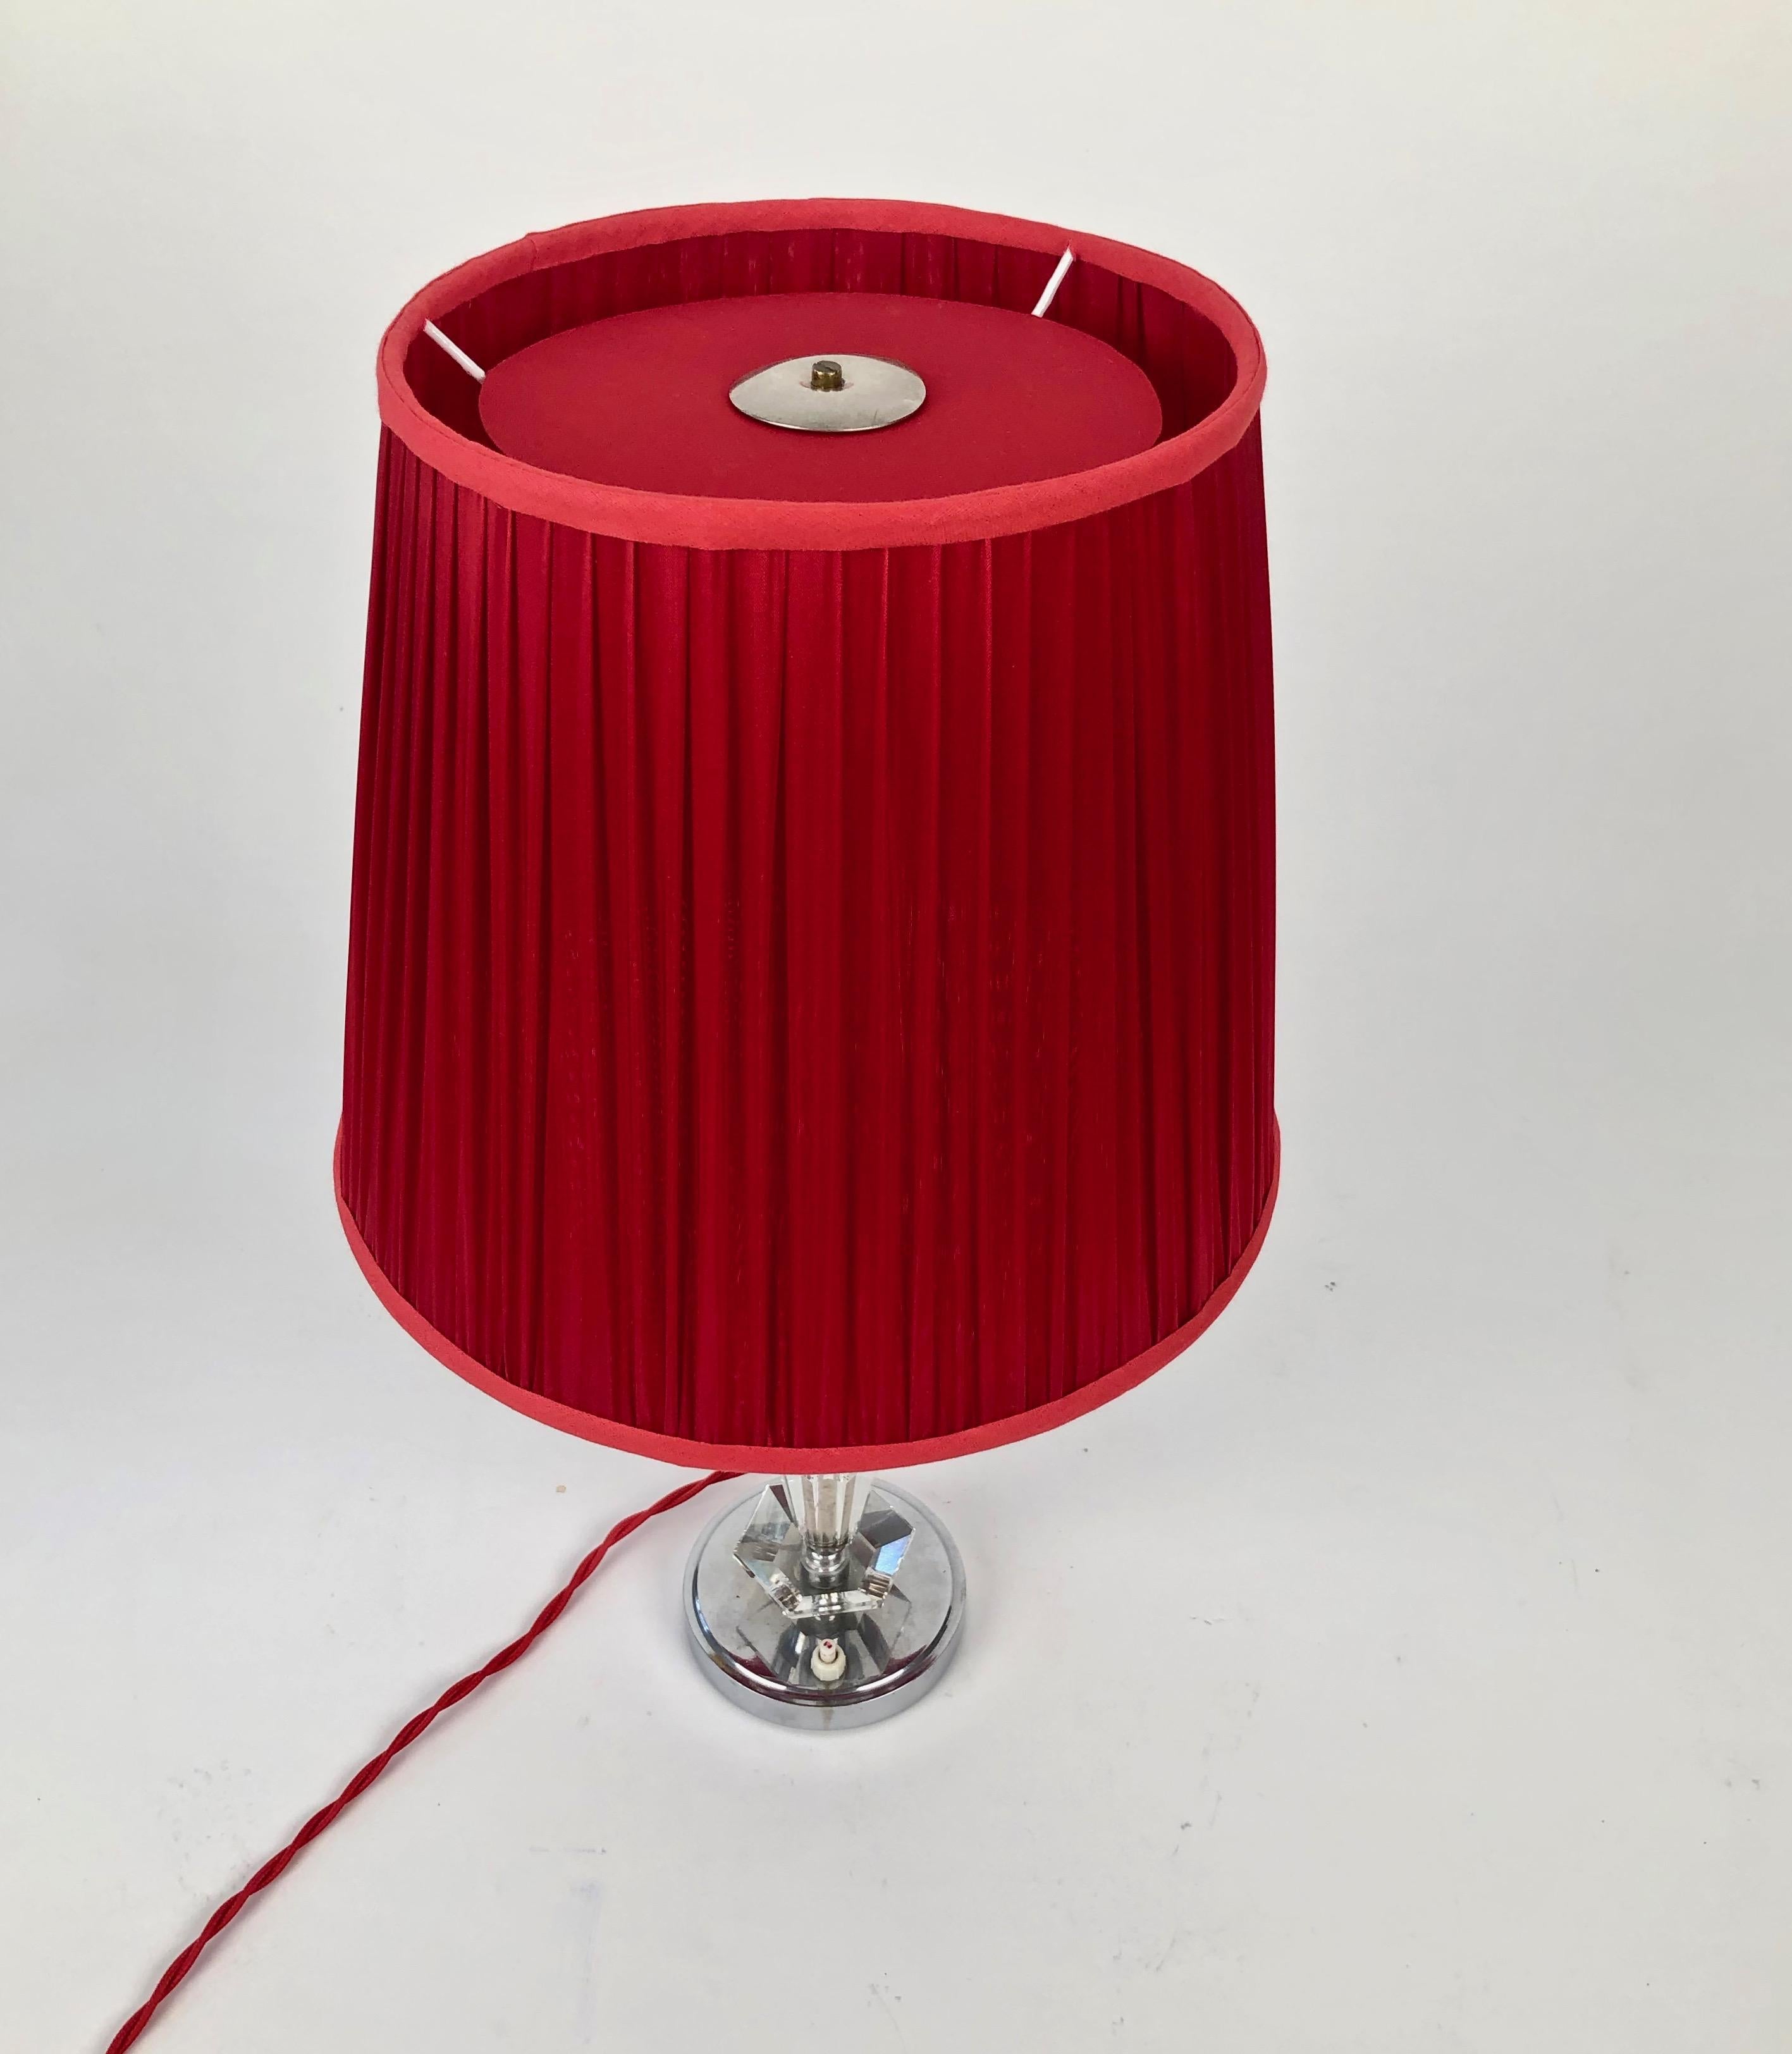 This is a beautiful cut glass table lamp from France. The geometrically cut glass elements
are composed in a elegant form. The red silk shade heightens the sensual form and is
complimented with a woven red textile cable from Italy.